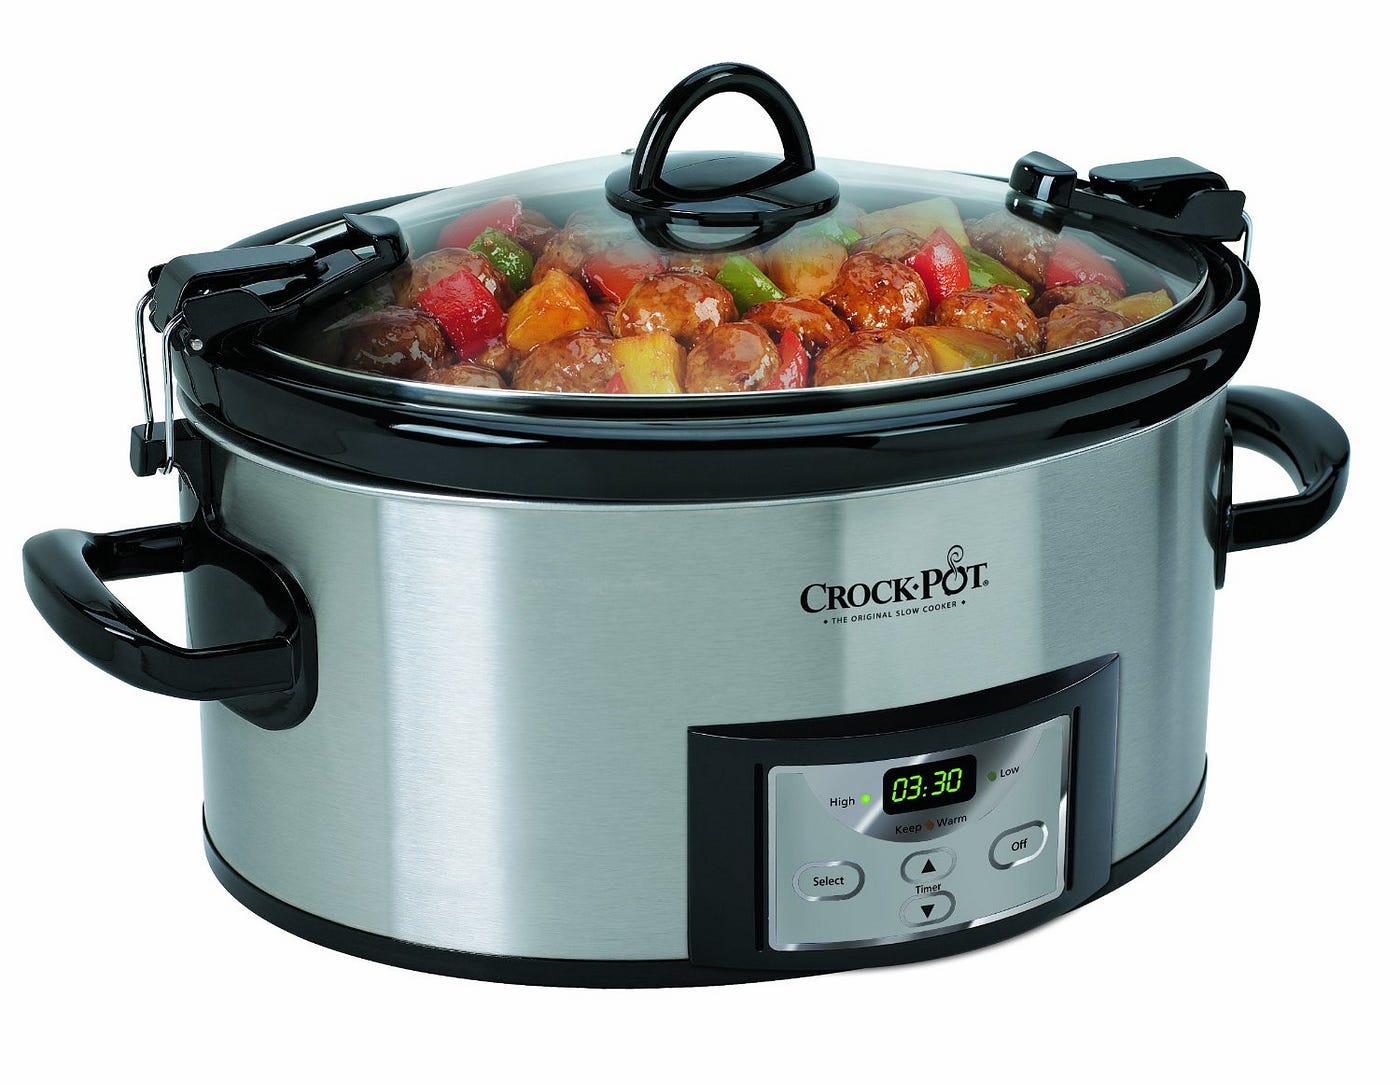 Crock-Pot Preparation for Teaching, by Timothy Dodd